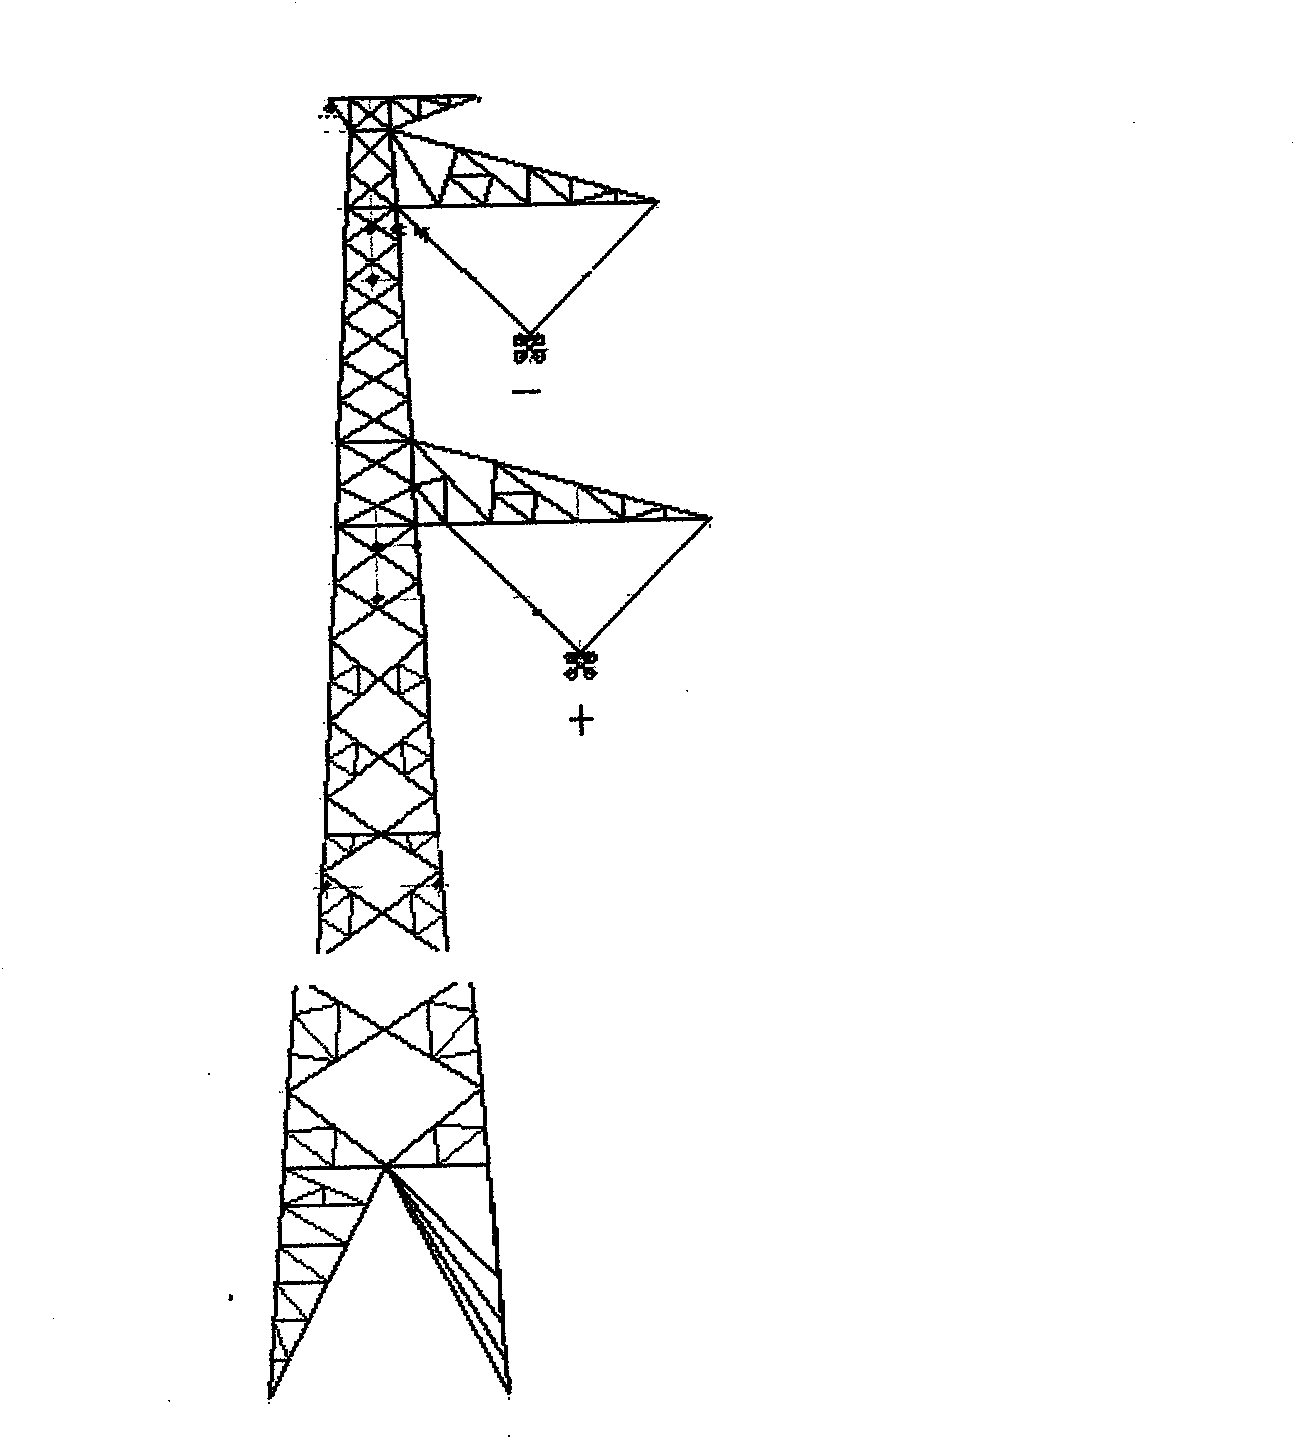 Conductor configuration method for direct current power transmission circuit